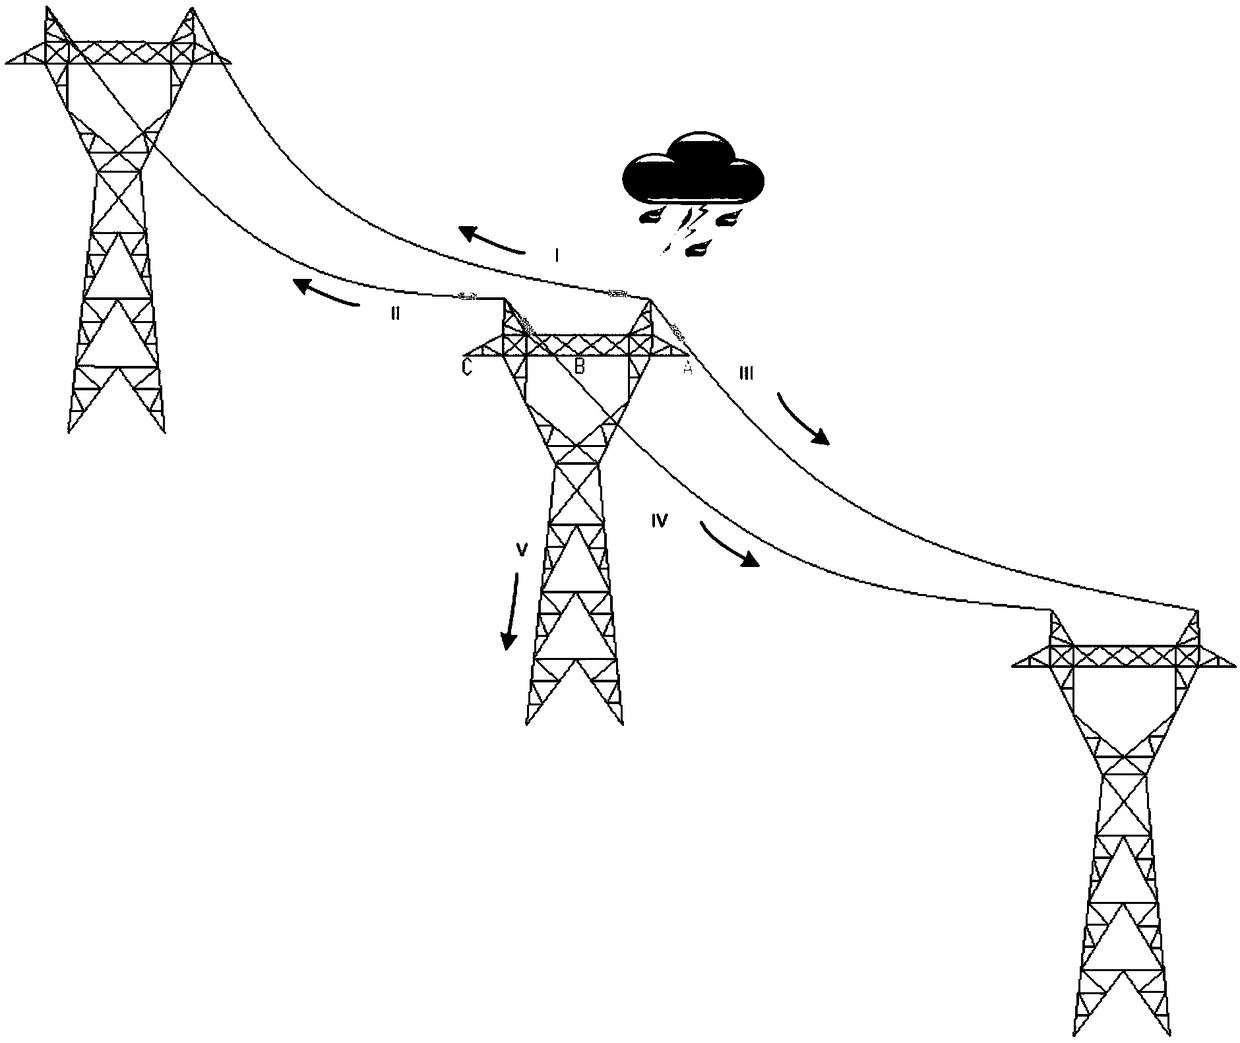 Online monitoring method for grounding resistance of transmission line tower